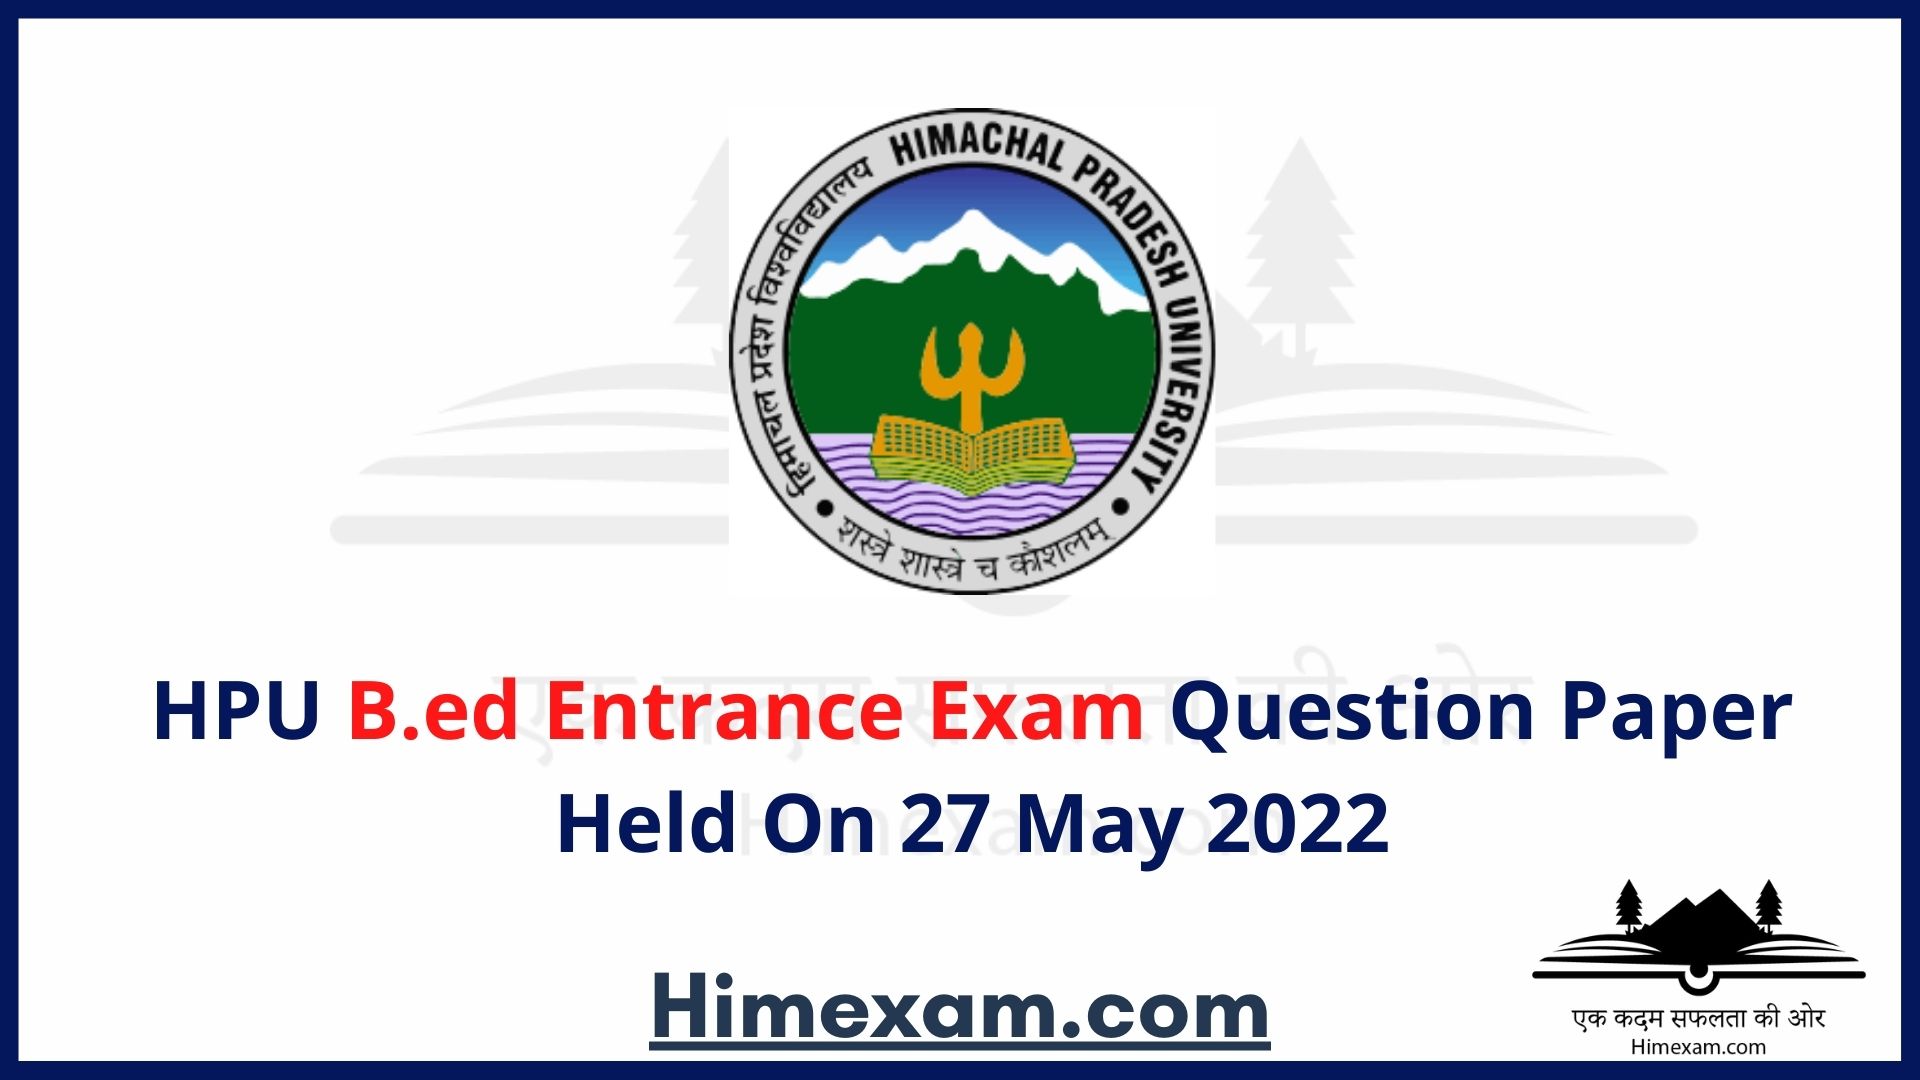 HPU B.ed Entrance Exam Question Paper Held On 27 May 2022